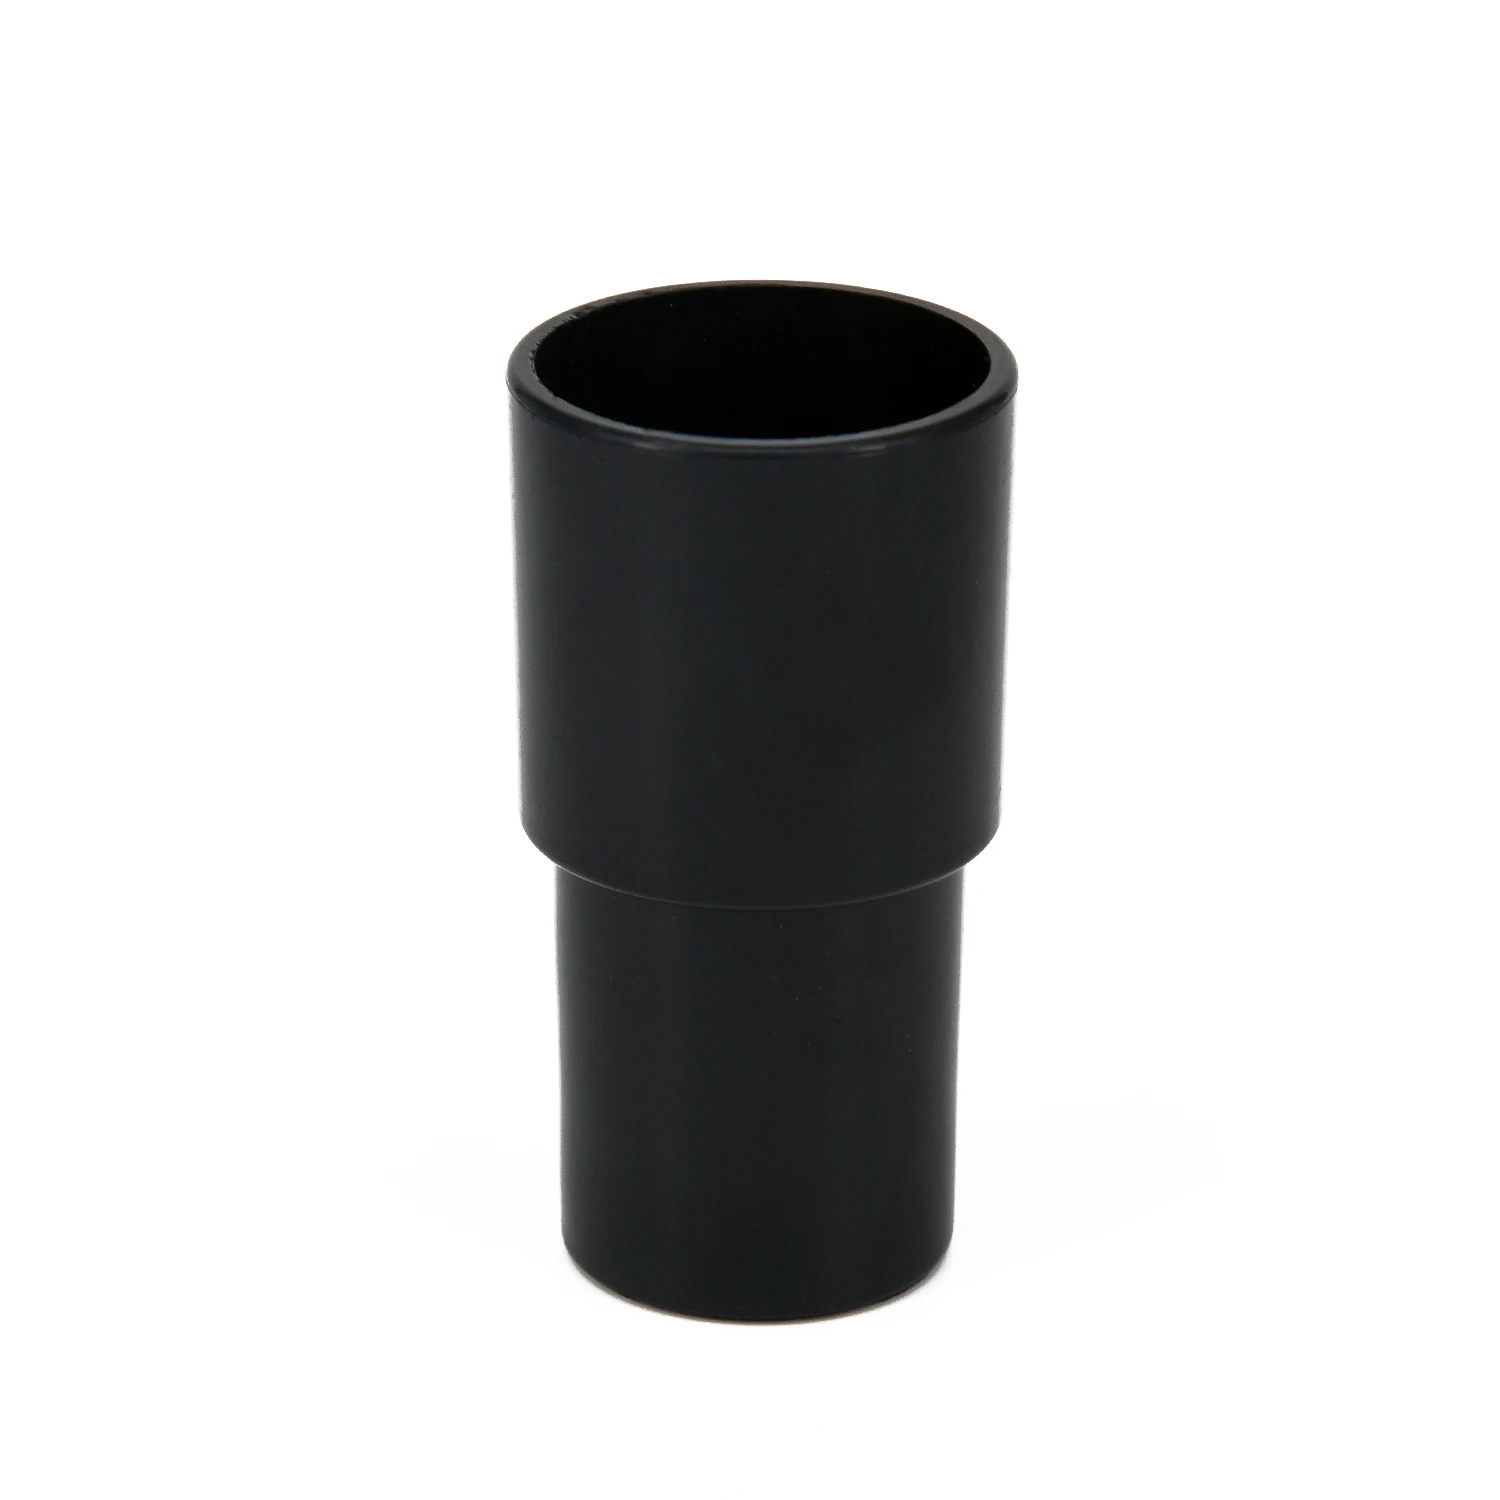 

Tool Hose Adapter Kit Adapters Connecting For 32mm-35mm Vacuum Cleaners 1pc 32mm to 35 mm Black Vacuum Cleaner